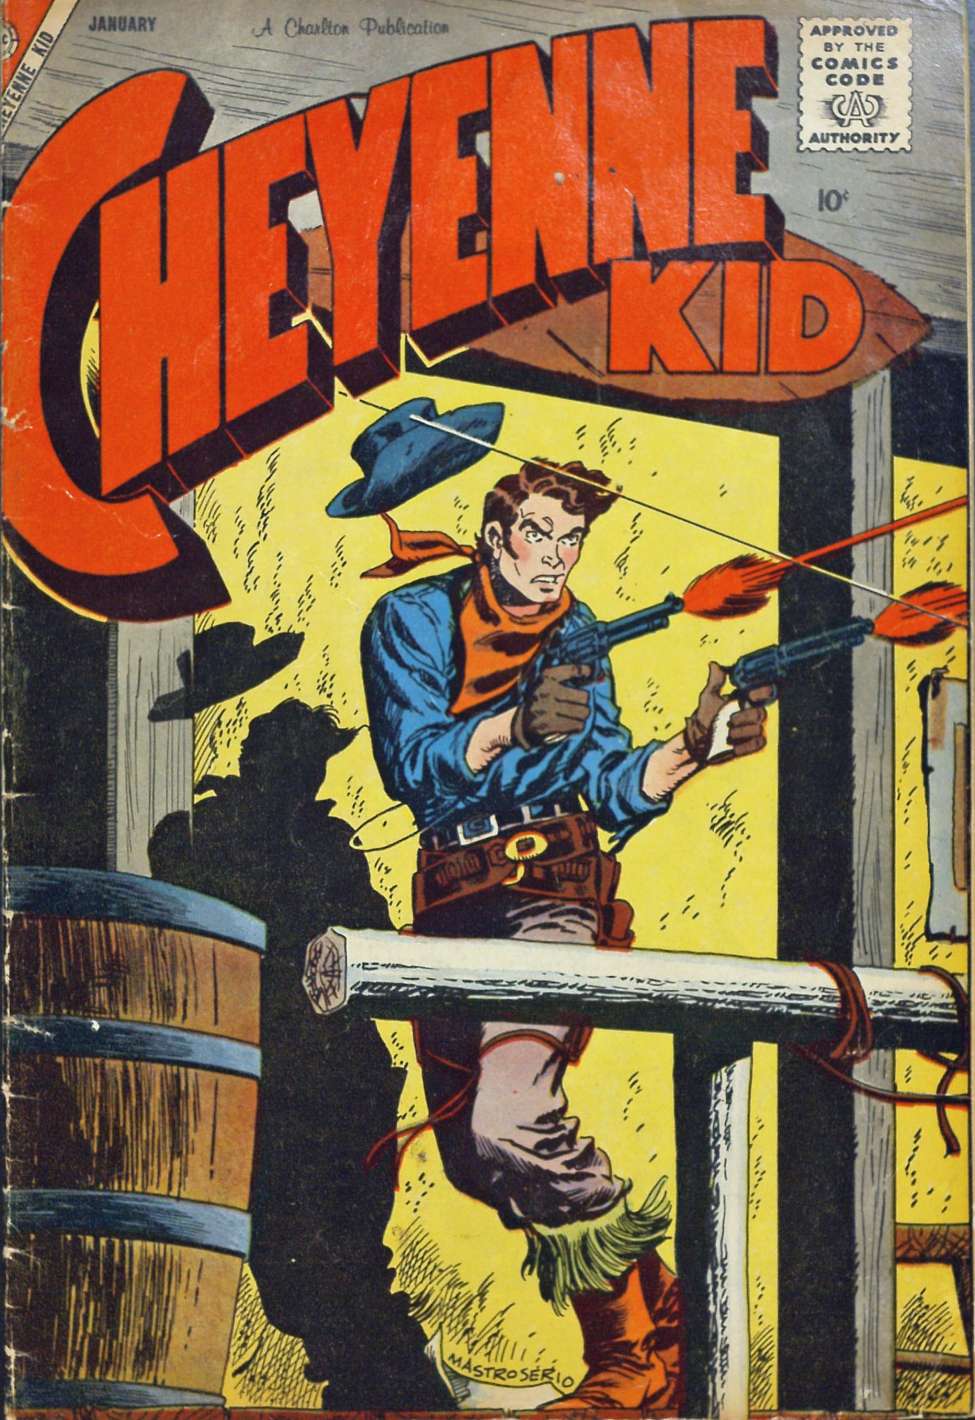 Book Cover For Cheyenne Kid 15 - Version 1